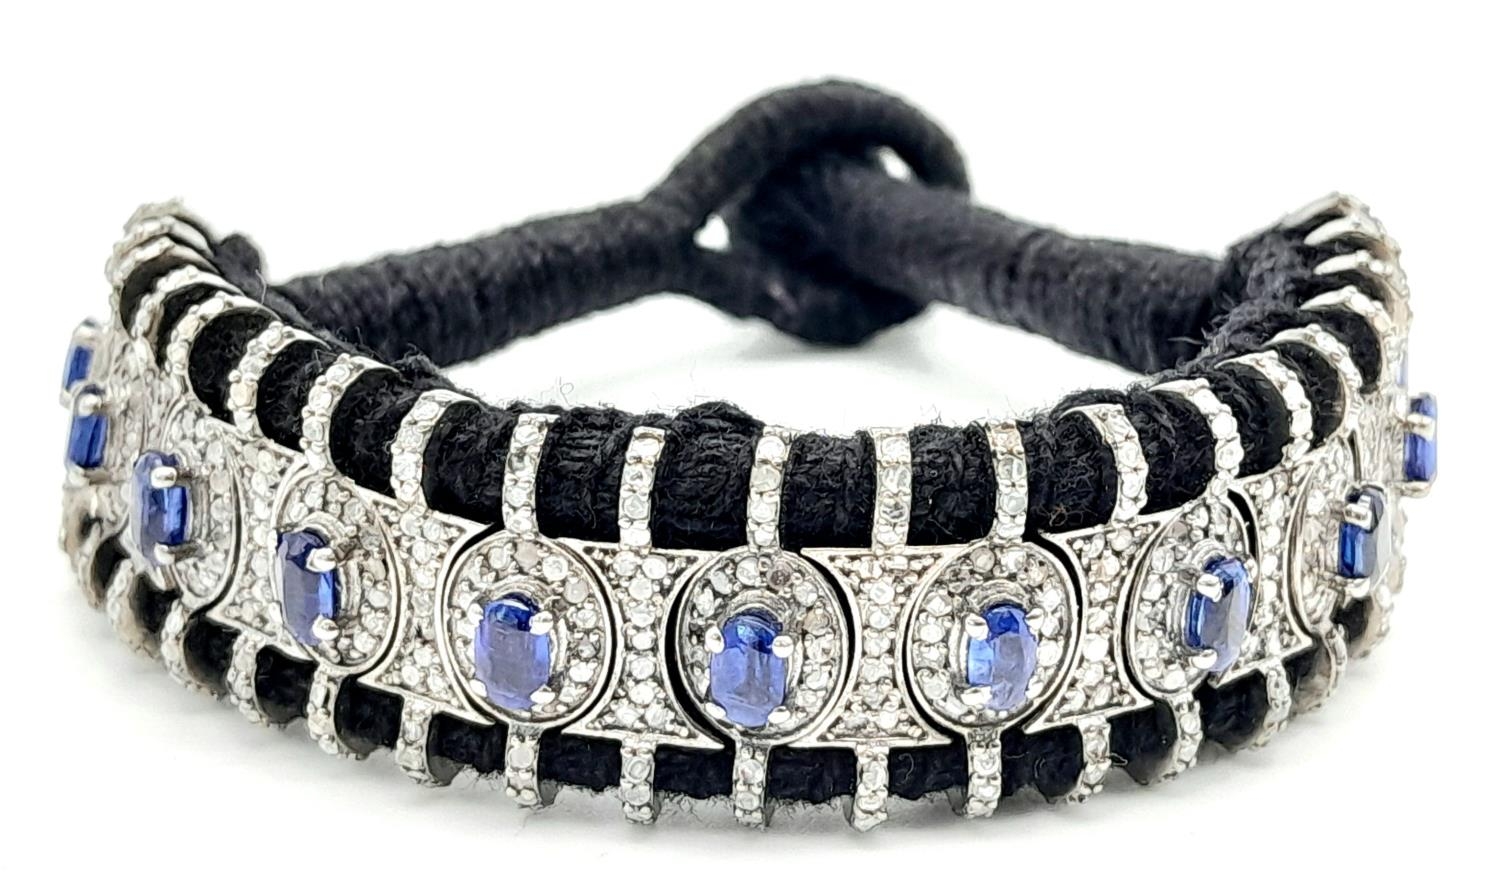 A Hand-Crafted Blue Sapphire and Diamond Encrusted Bracelet. Black textile set. Sapphires - 5ctw. - Image 5 of 8